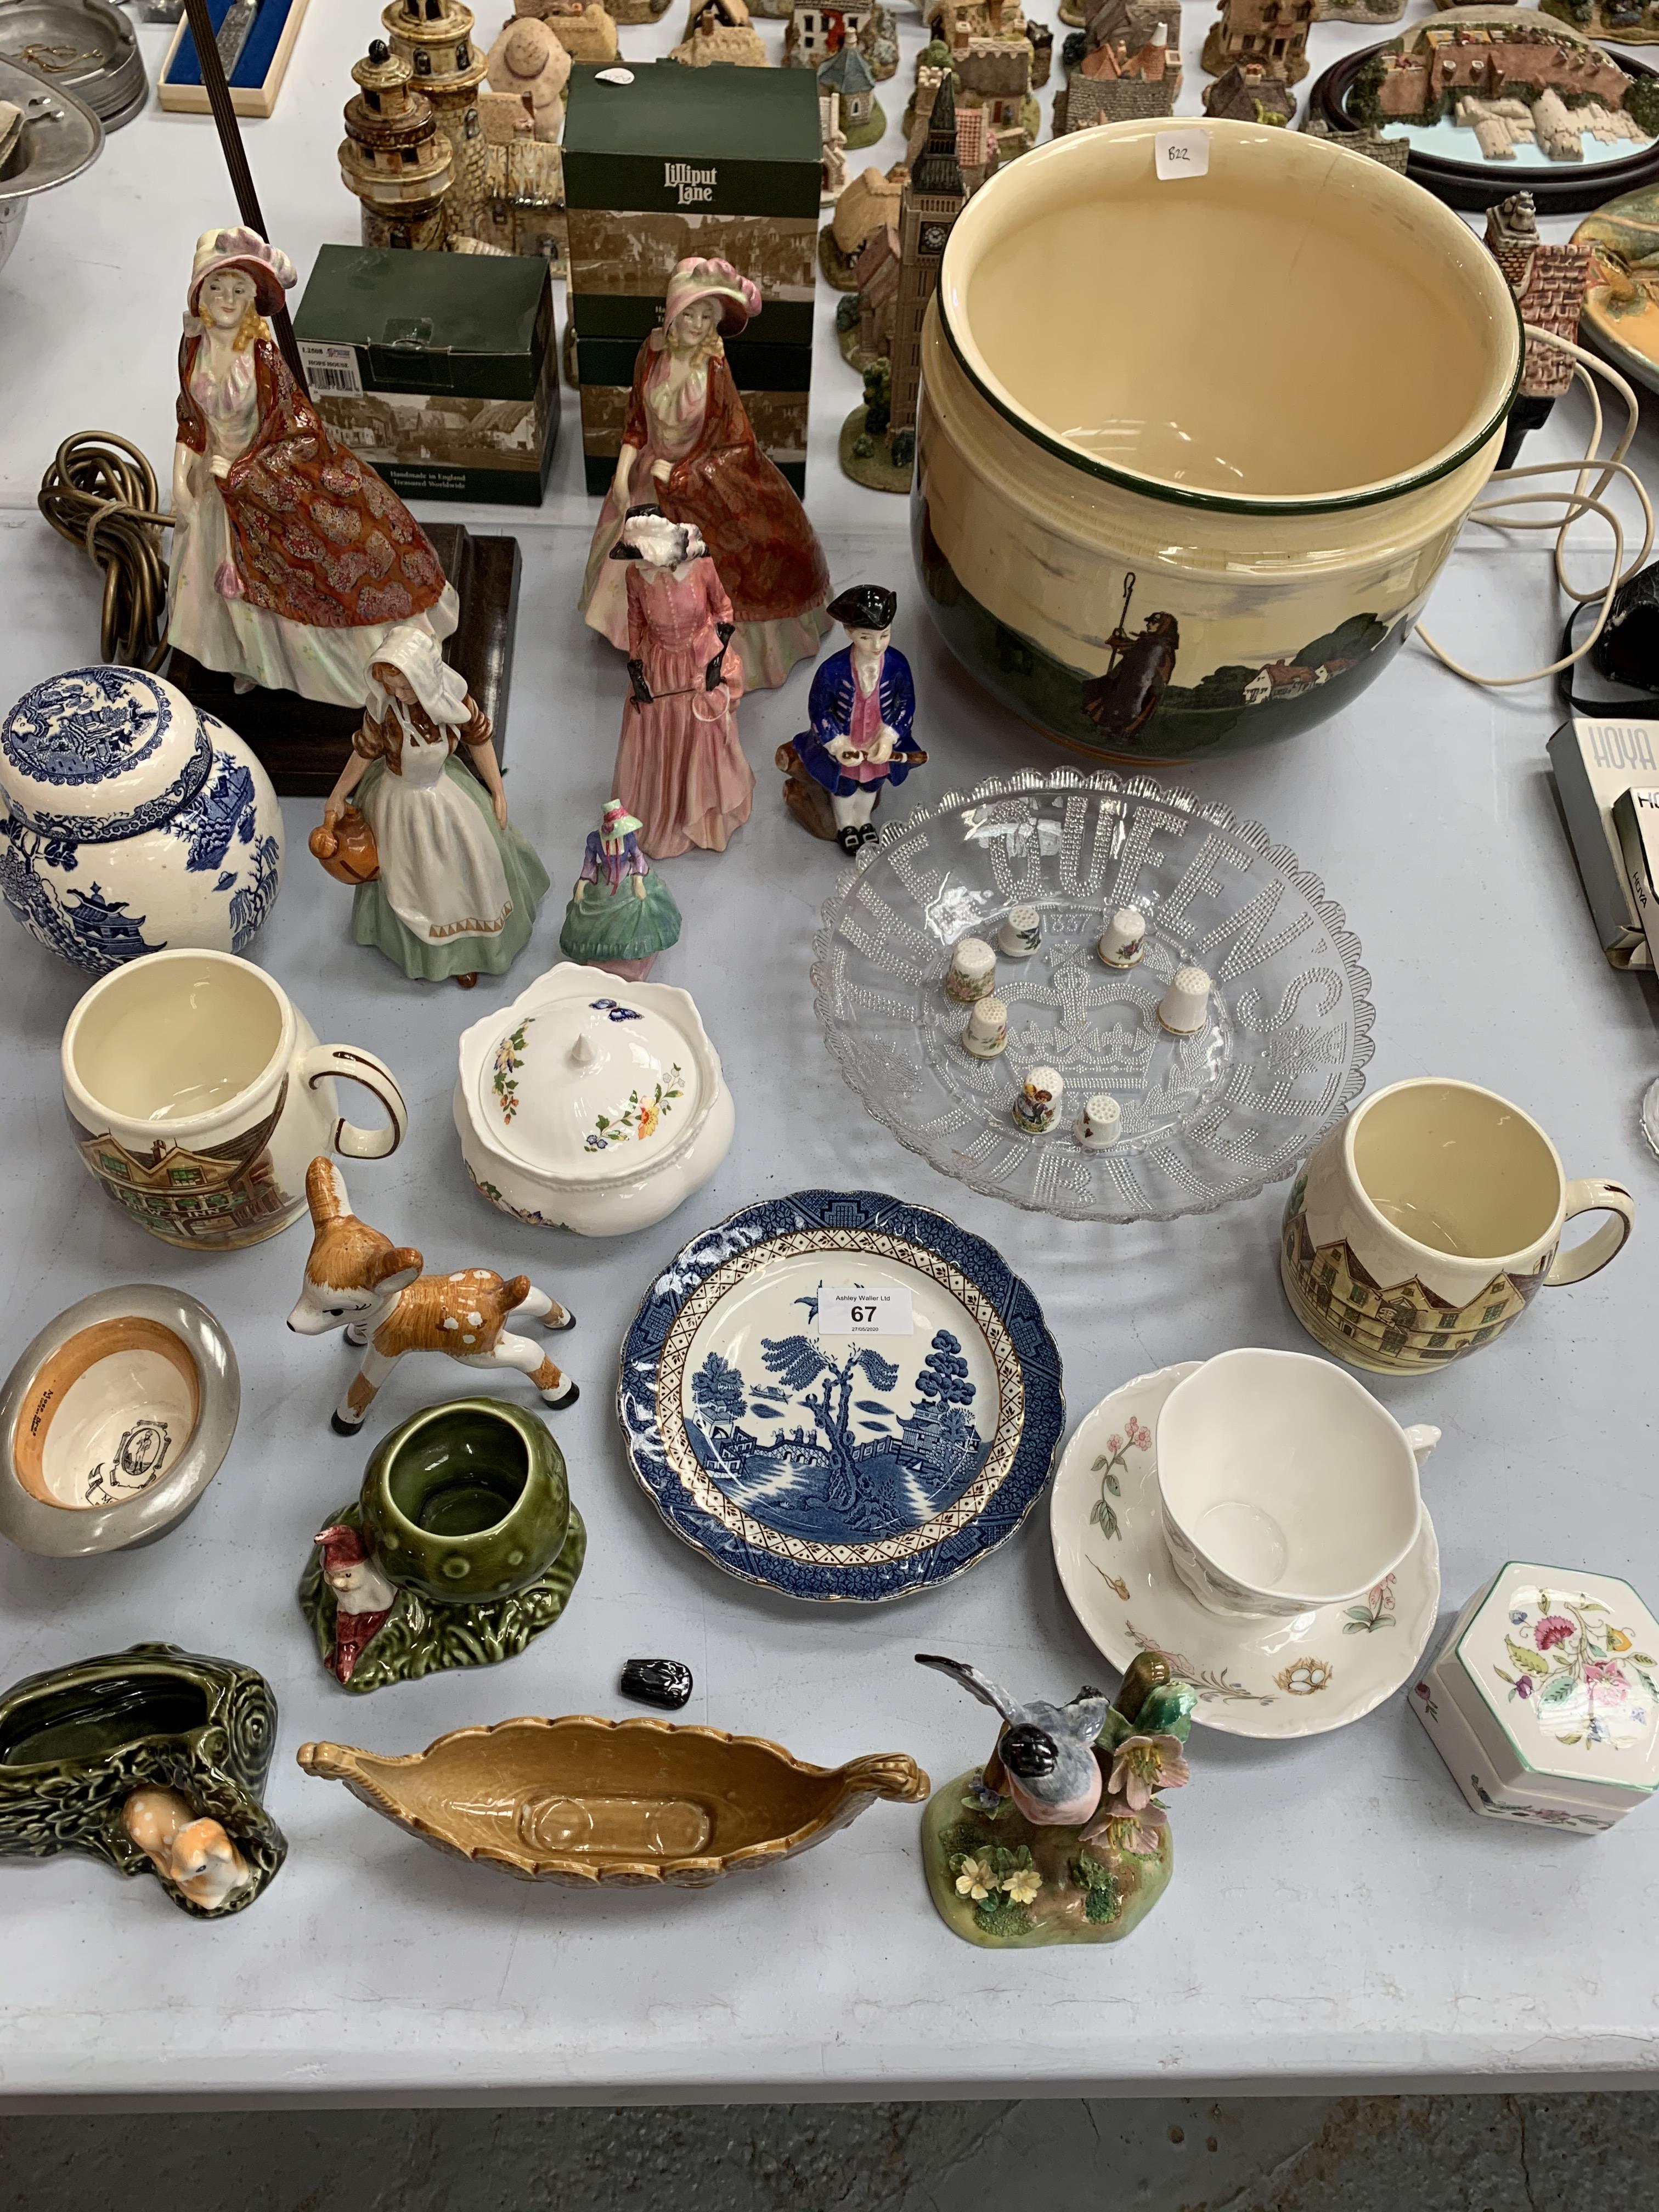 A LARGE COLLECTION OF VARIOUS CERAMIC ITEMS TO INCLUDE FIGURINES, GINGER JAR, PLANTER, DISHES, ETC